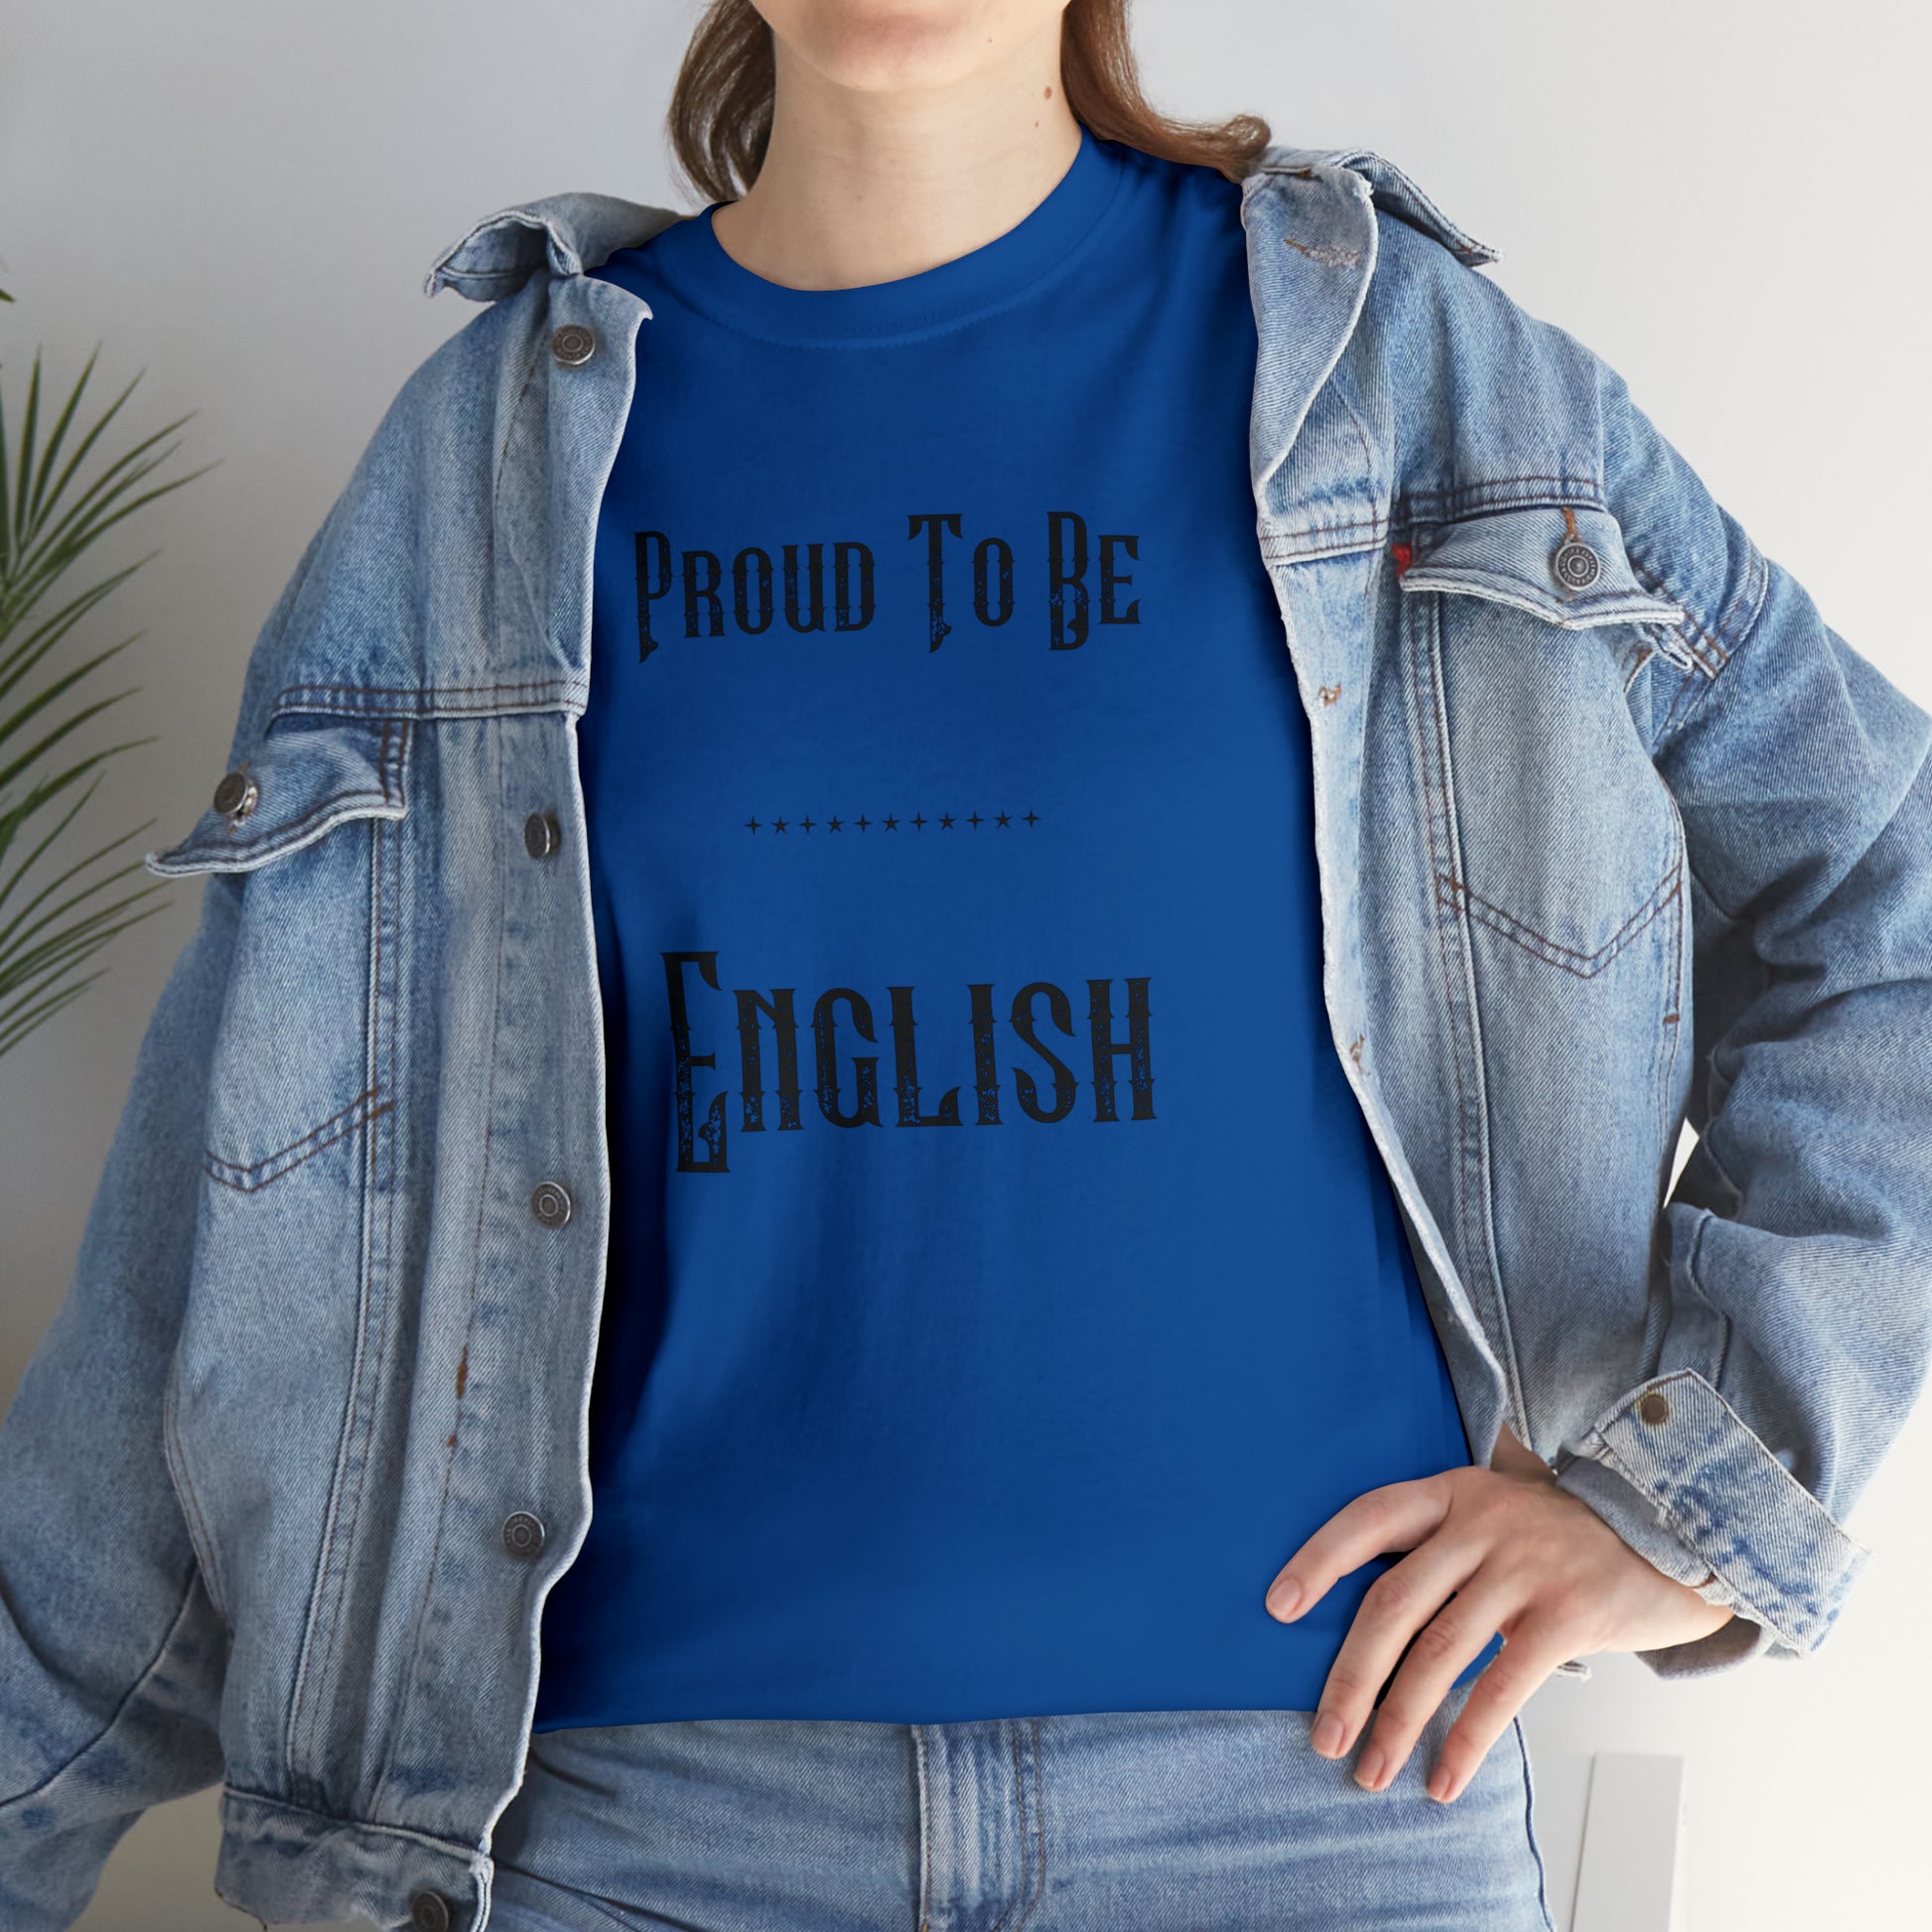 "Proud To Be English" T-Shirt - Weave Got Gifts - Unique Gifts You Won’t Find Anywhere Else!